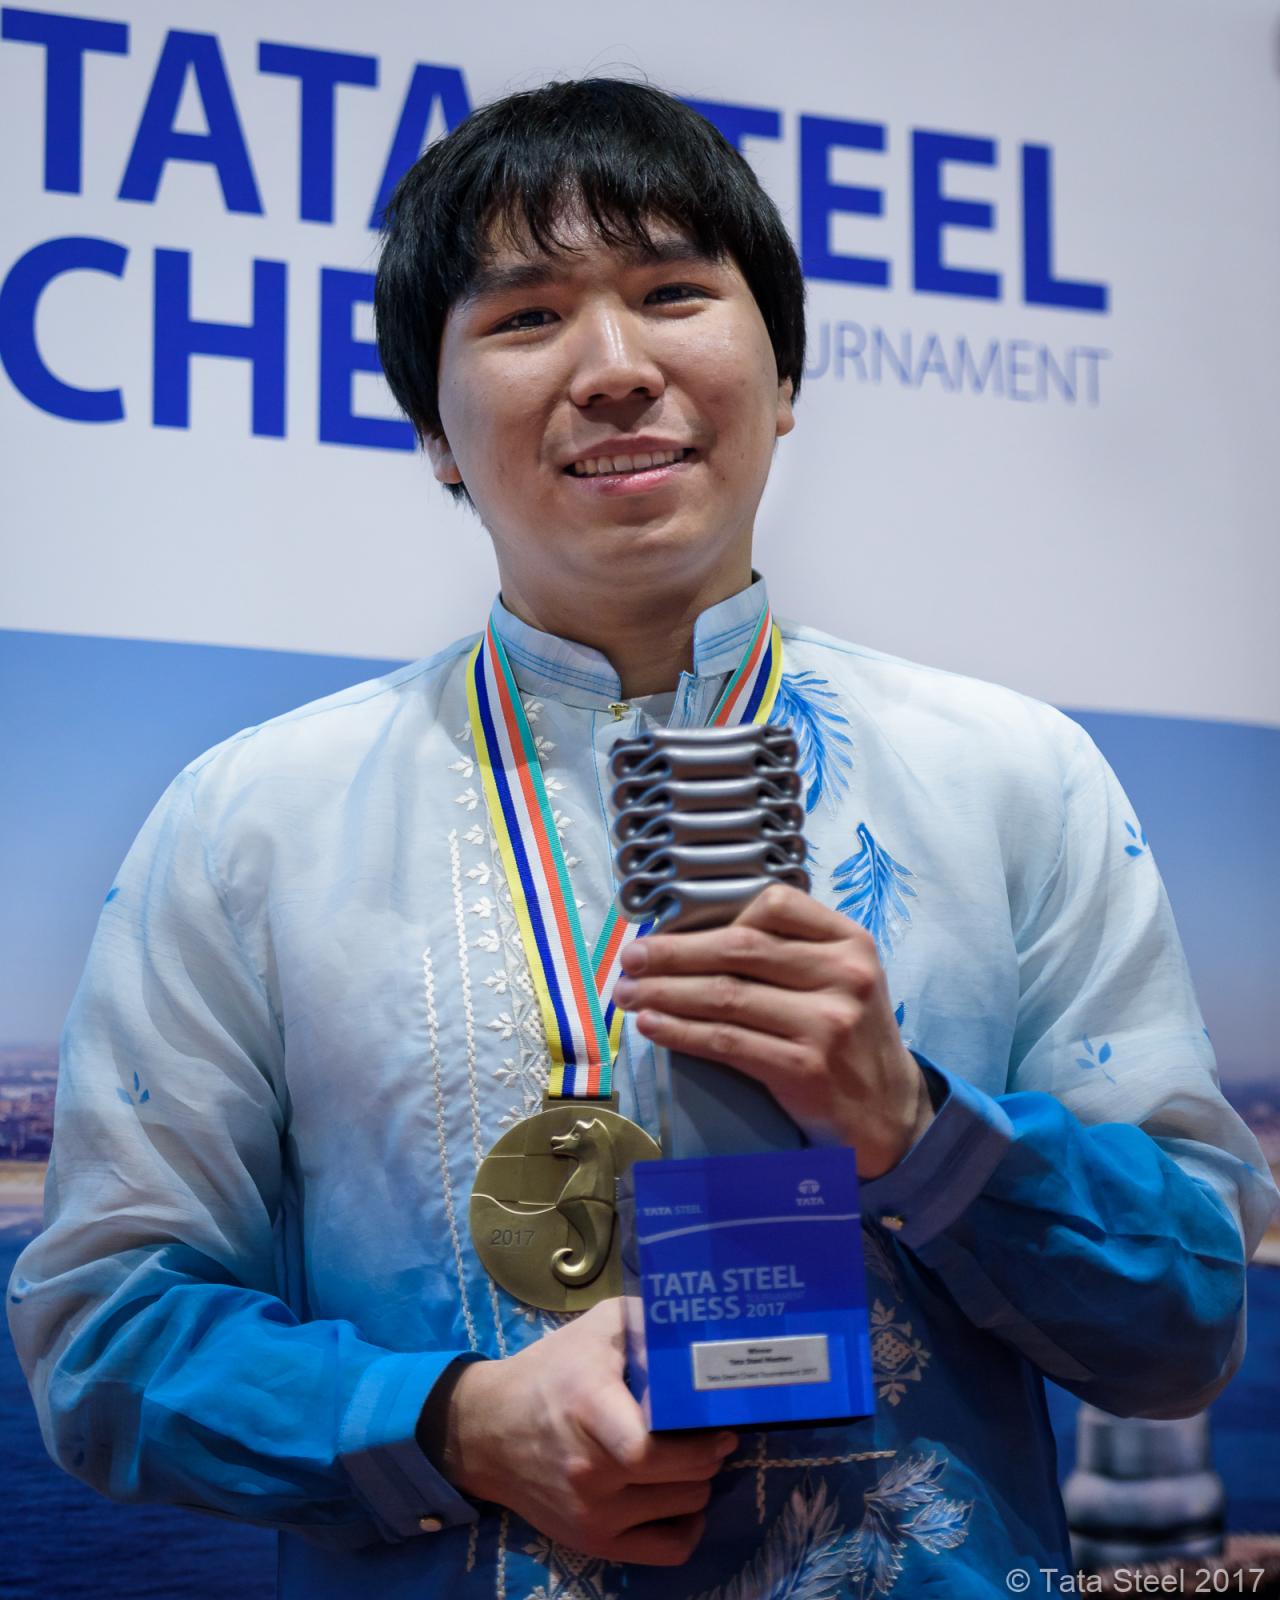 U.S. Chess Champion Wesley So Sets Sights on World Crown